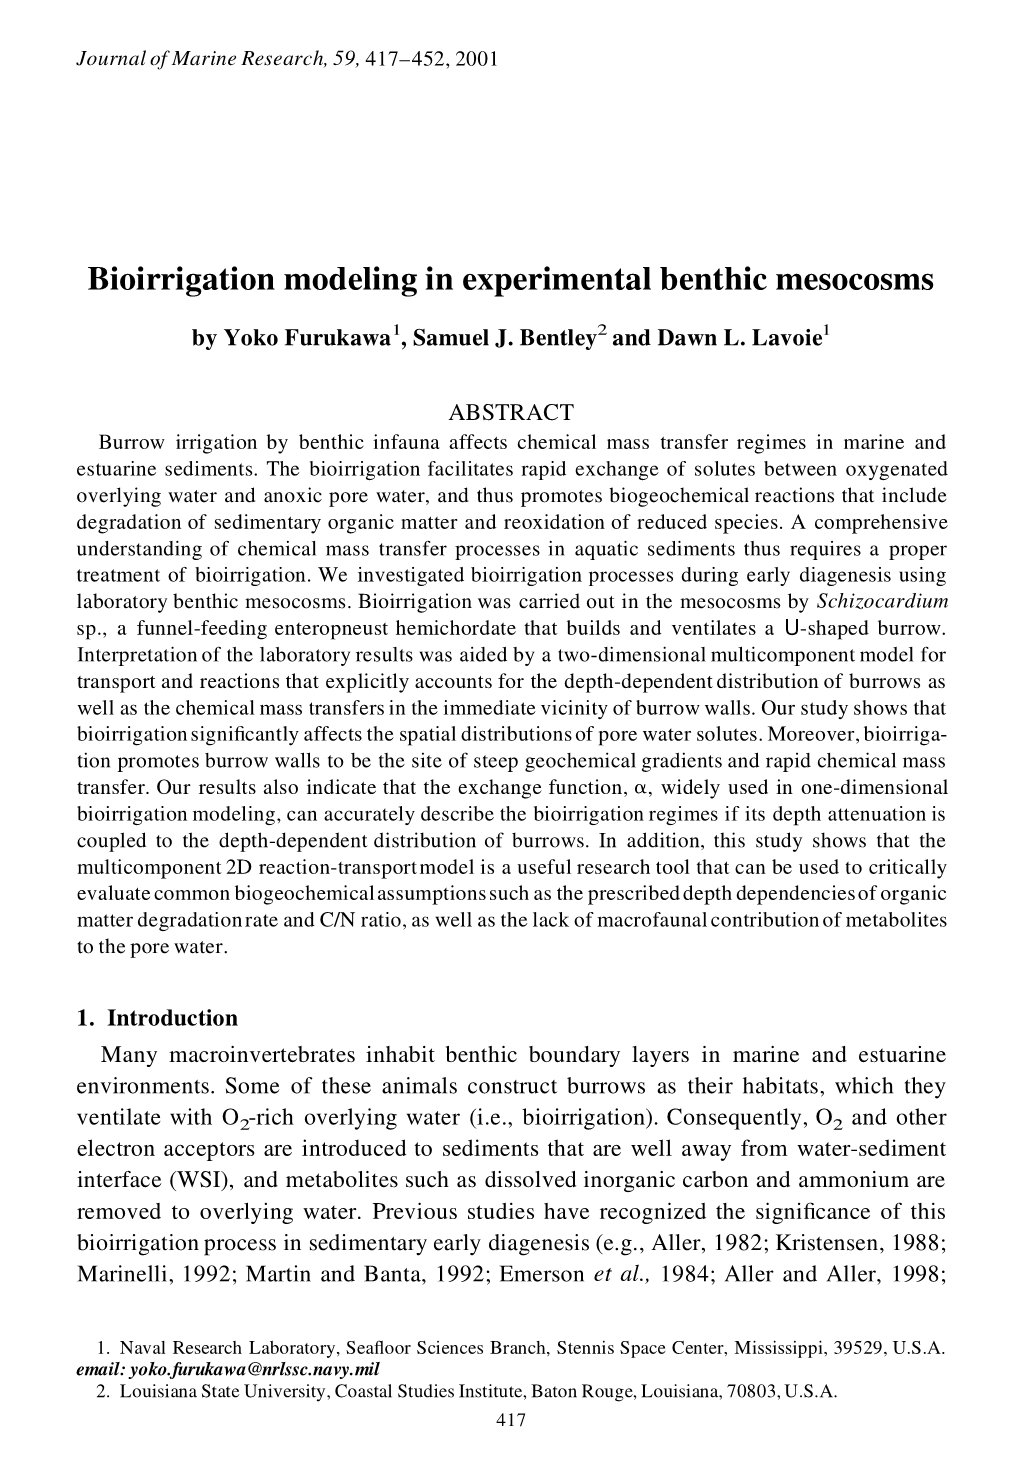 Bioirrigation Modeling in Experimental Benthic Mesocosms